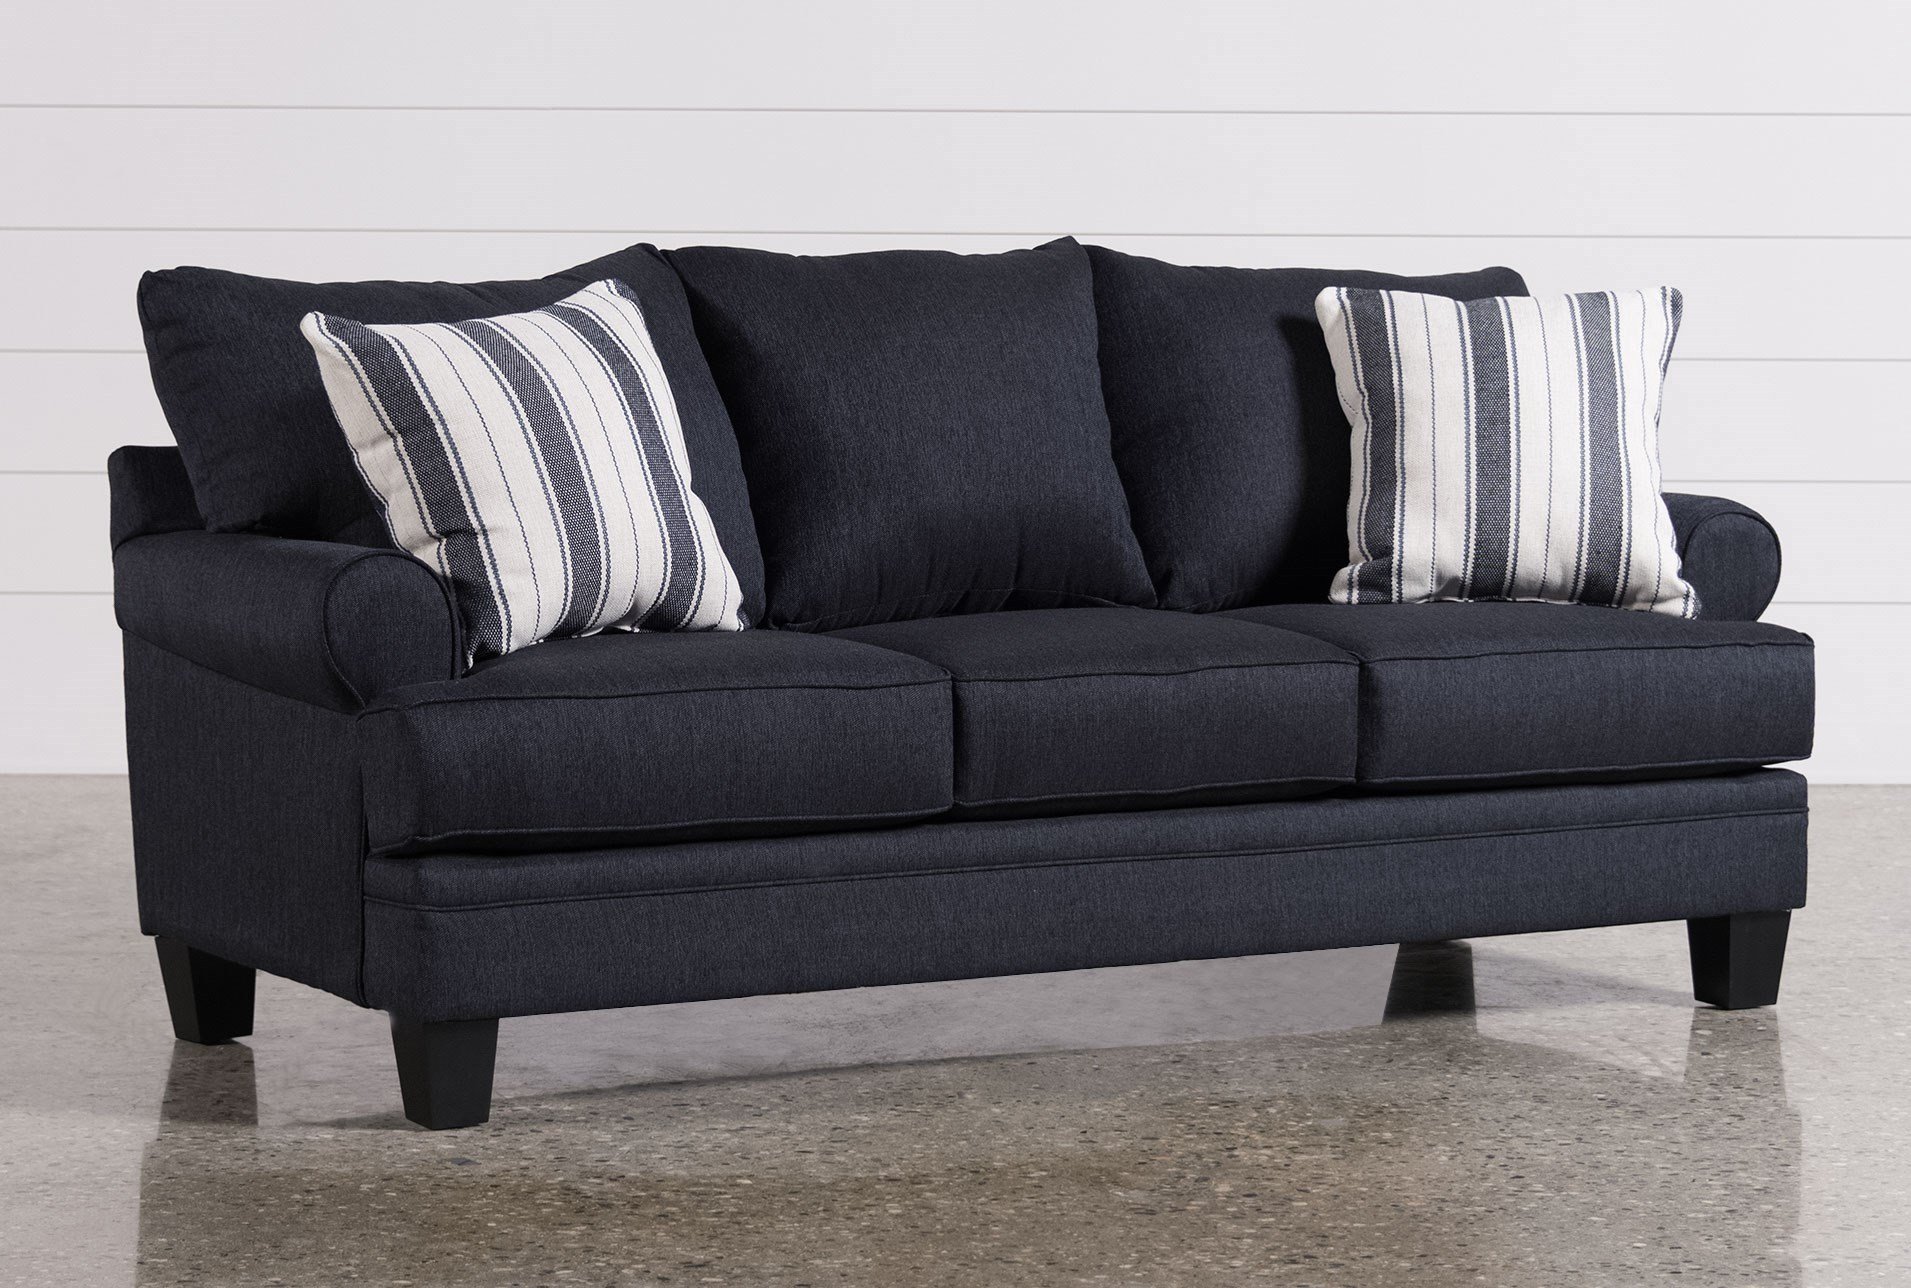 Fabric Sofas & Couches - Free Assembly with Delivery | Living Spaces